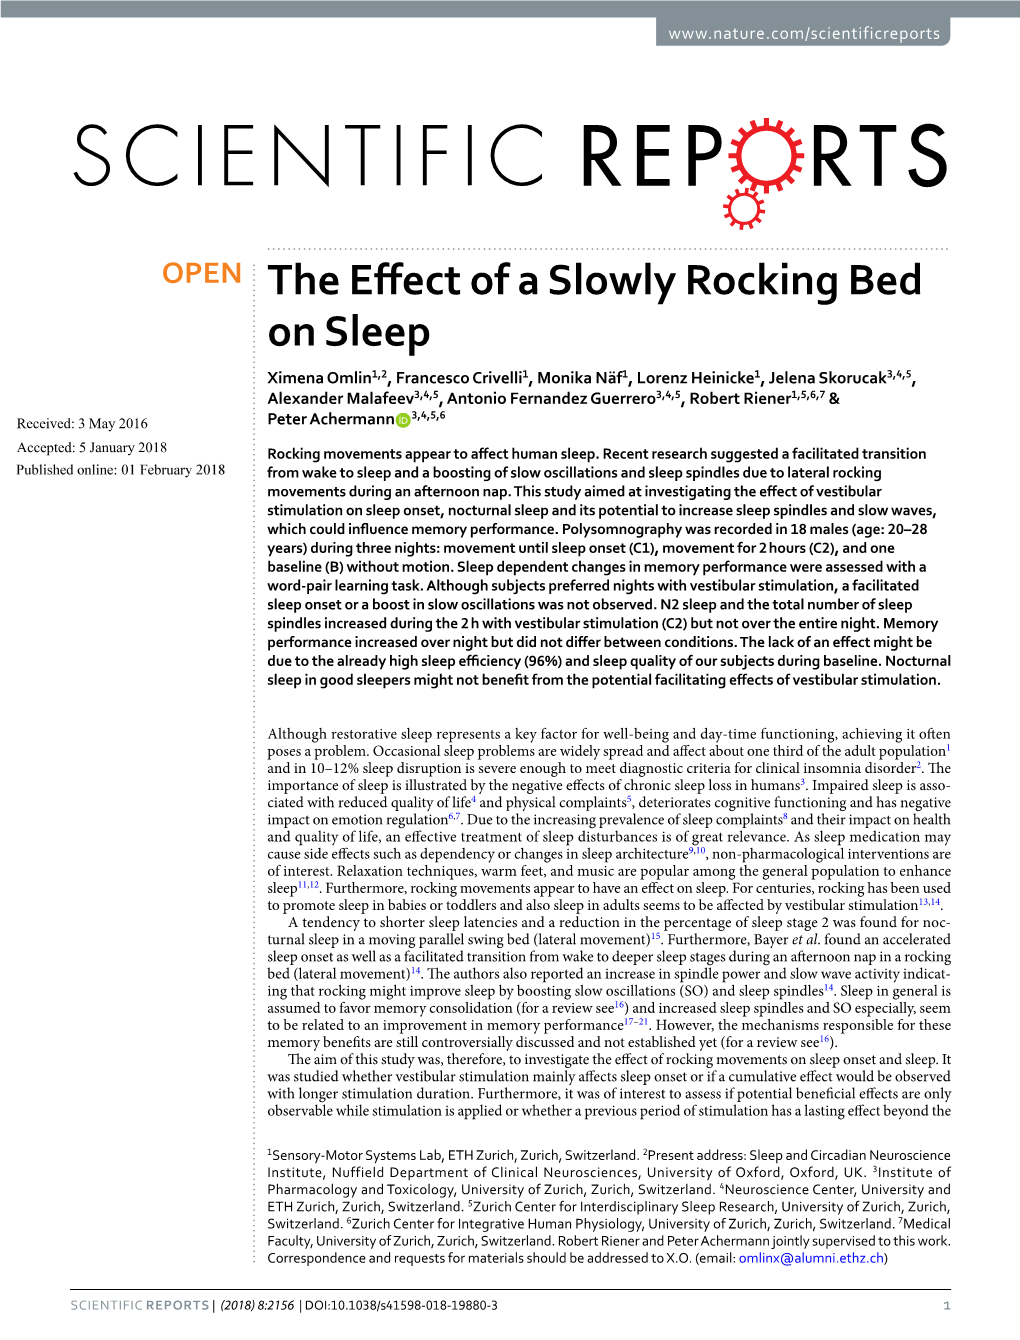 The Effect of a Slowly Rocking Bed on Sleep